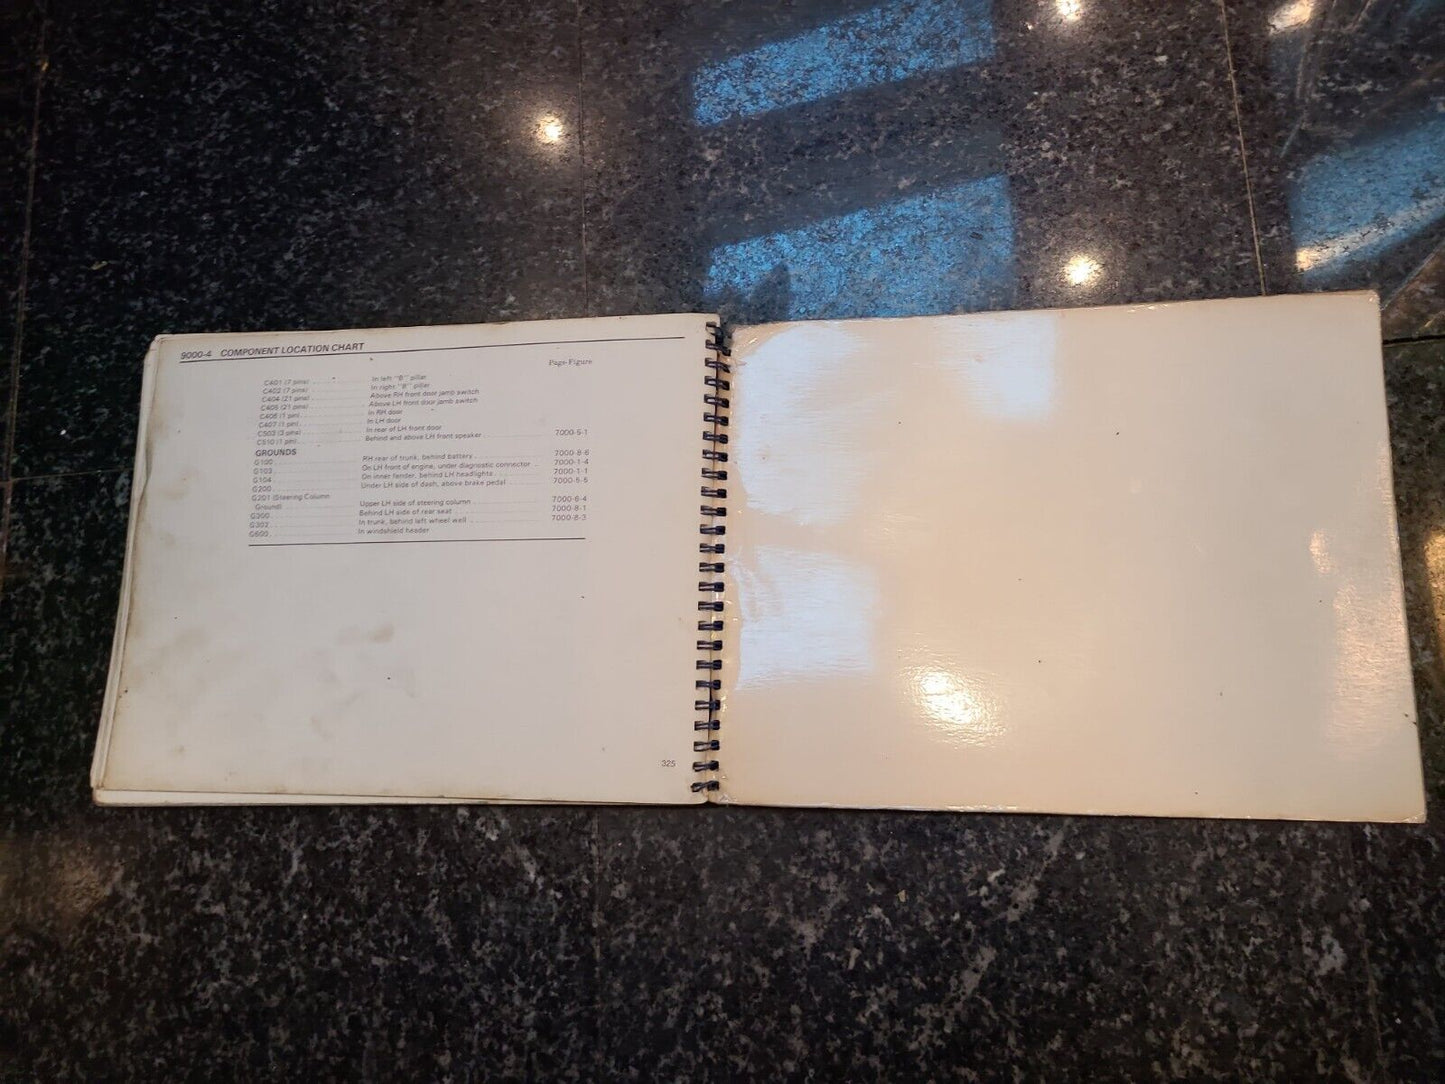 1986 BMW 325e Electrical Troubleshooting Manual factory dealership oem